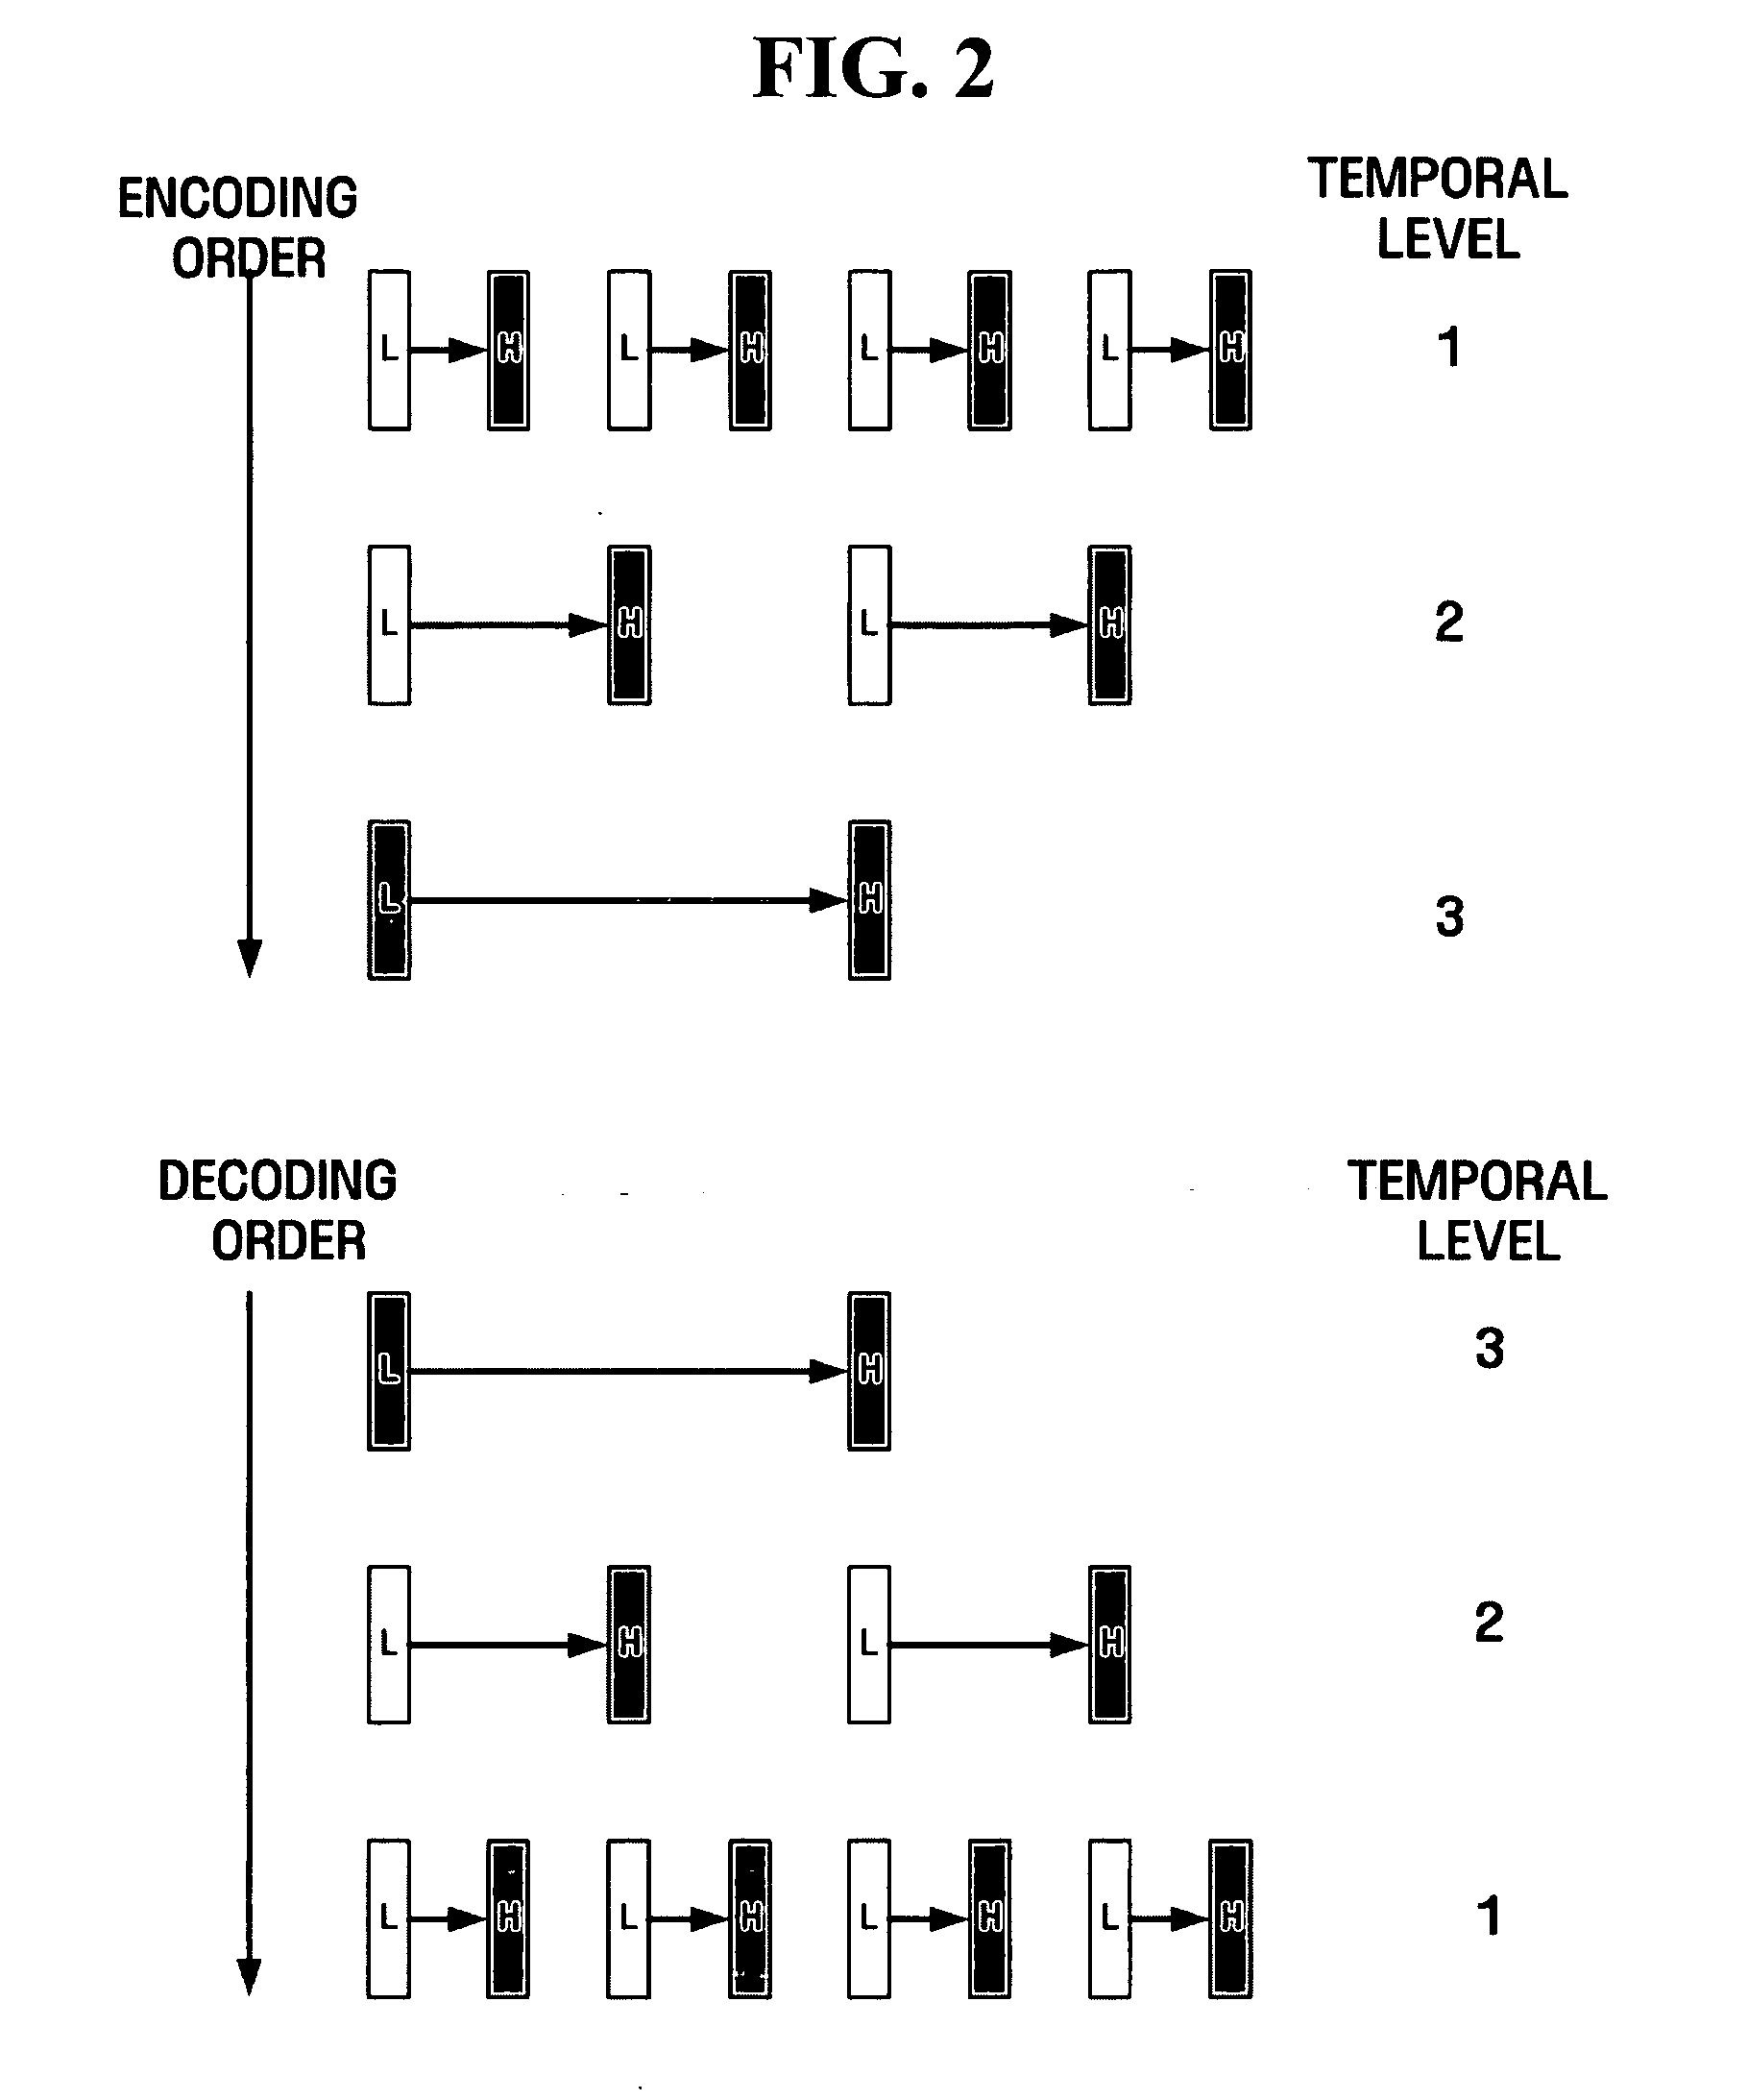 Apparatus and method for scalable video coding providing scalability in encoder part